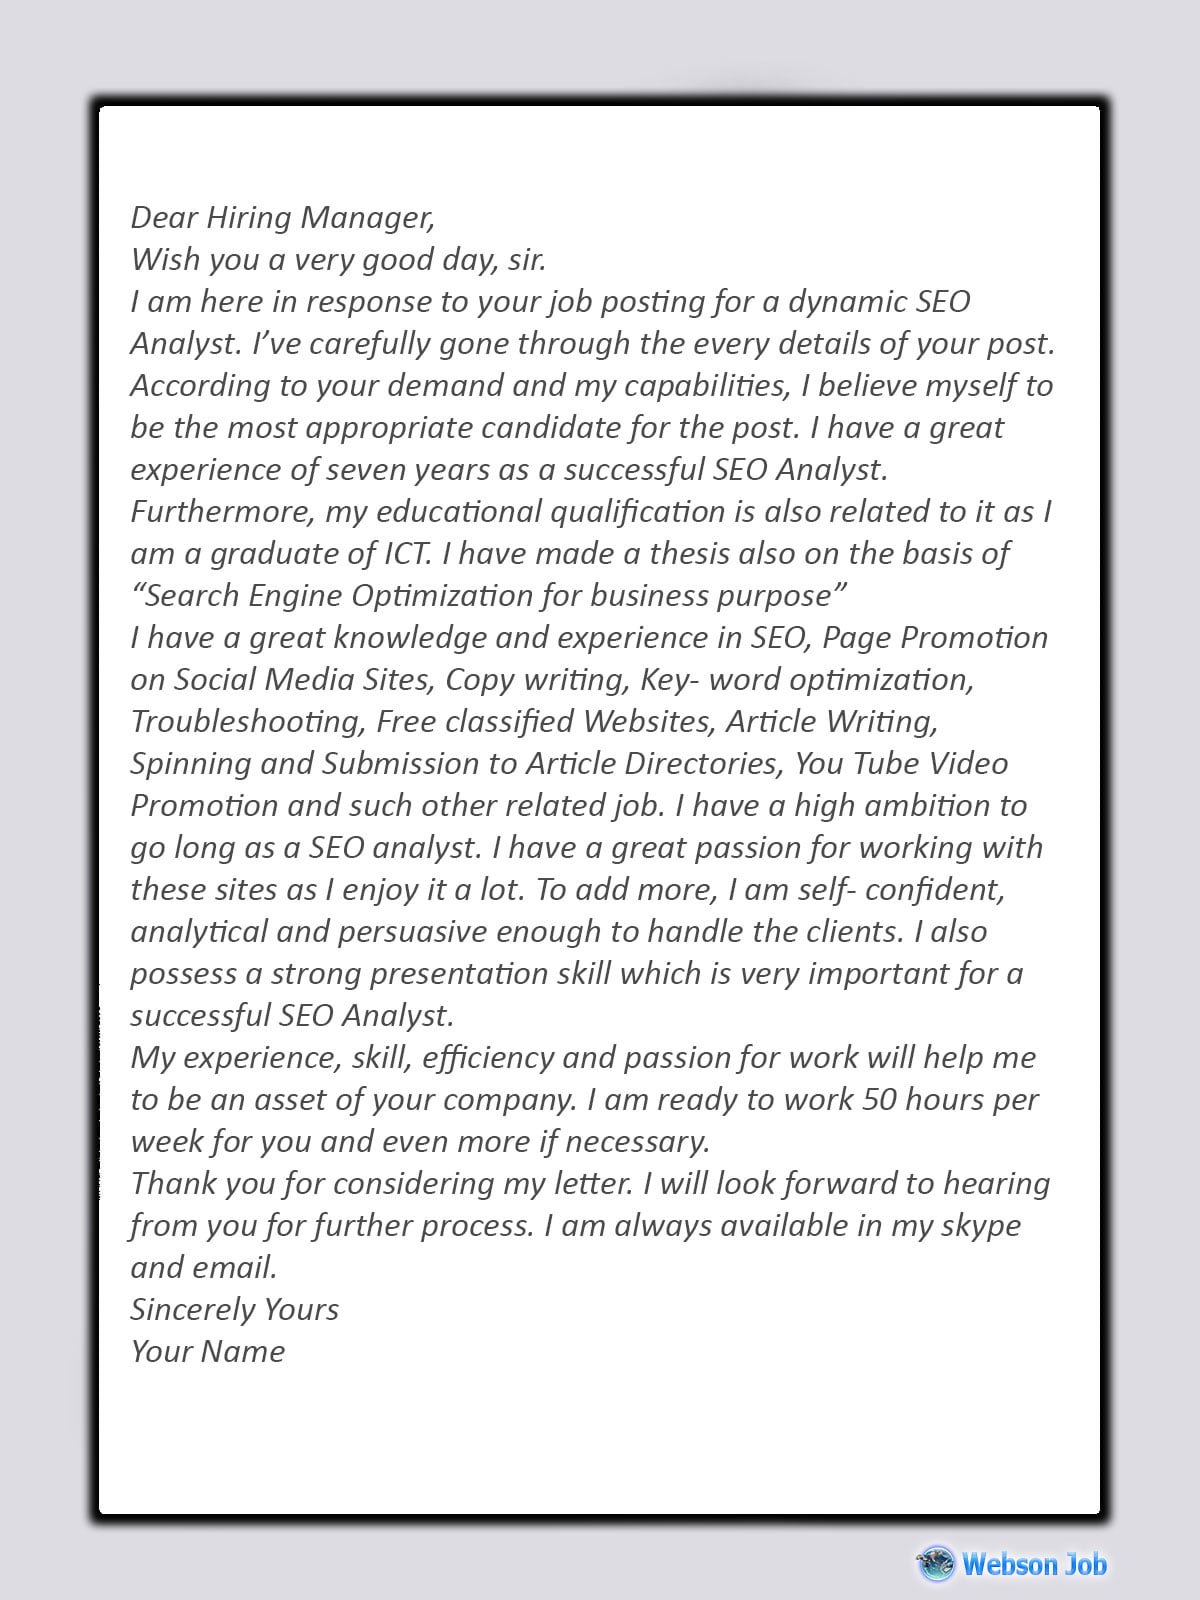 Upwork Cover Letter Sample for SEO (Search Engine Optimization)